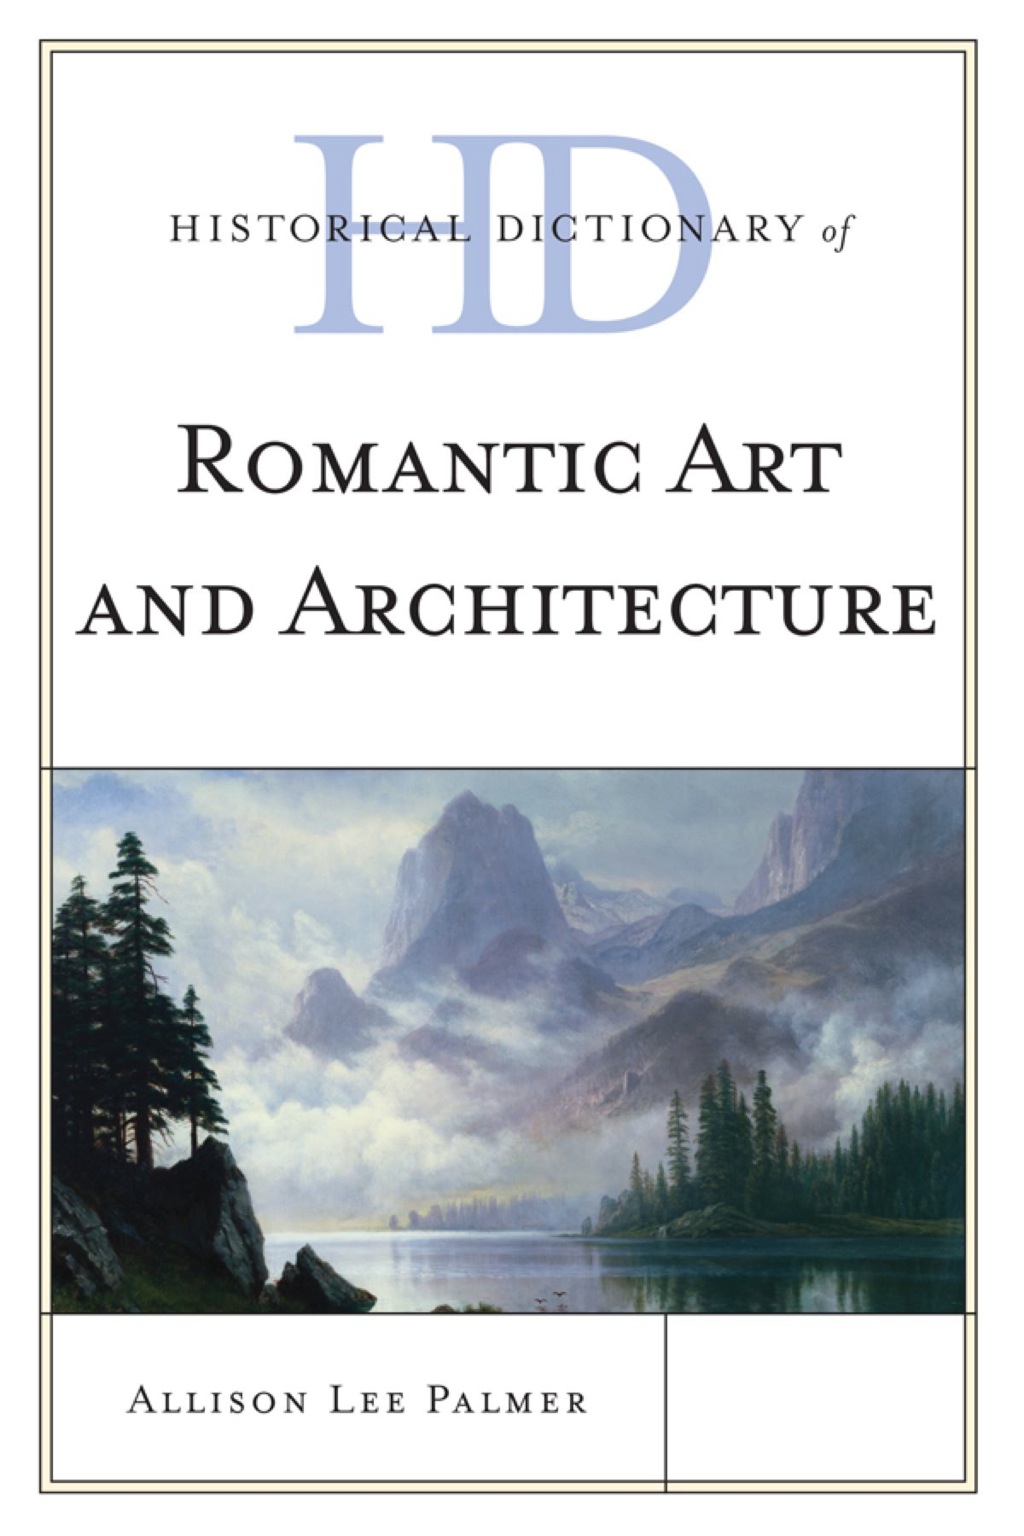 Historical Dictionary of Romantic Art and Architecture (eBook) - Allison Lee Palmer,